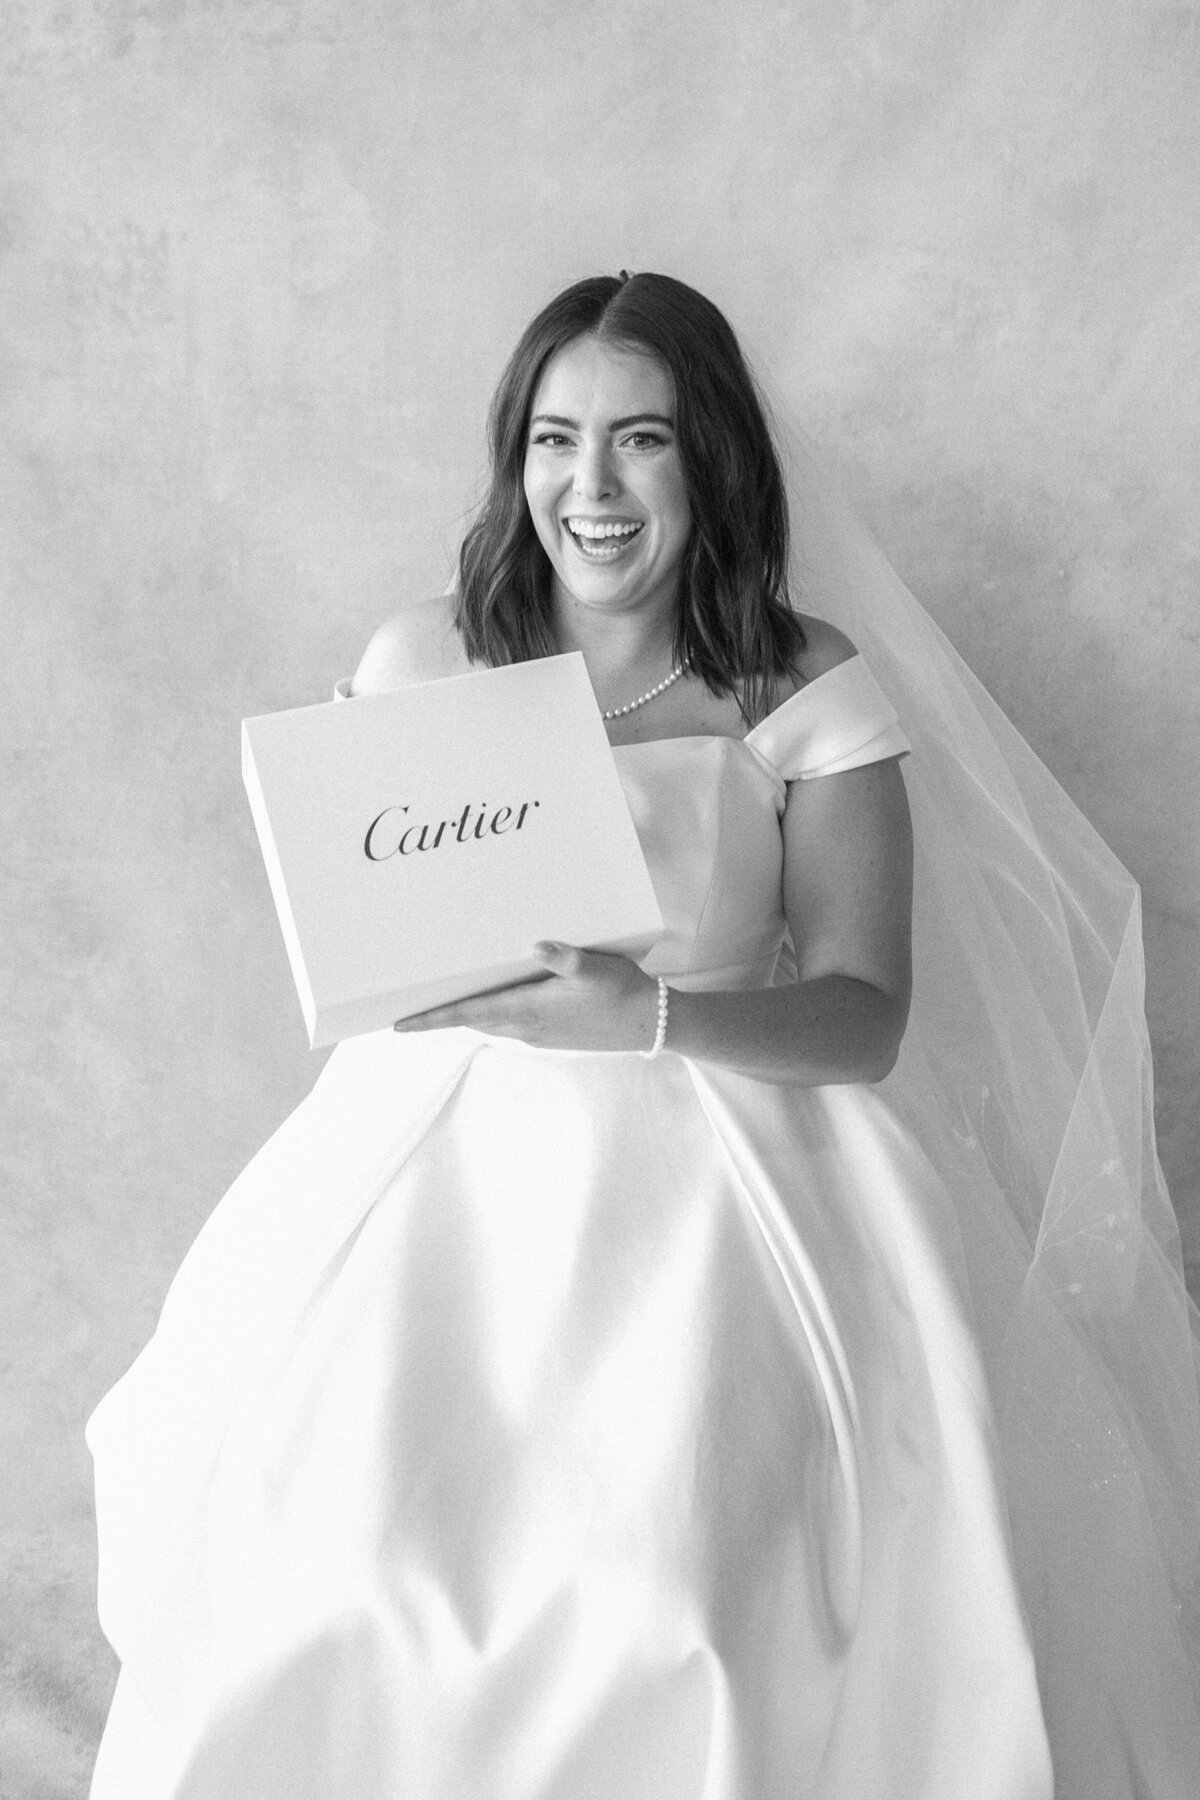 Bride in her wedding gown holds a Cartier box and smiles